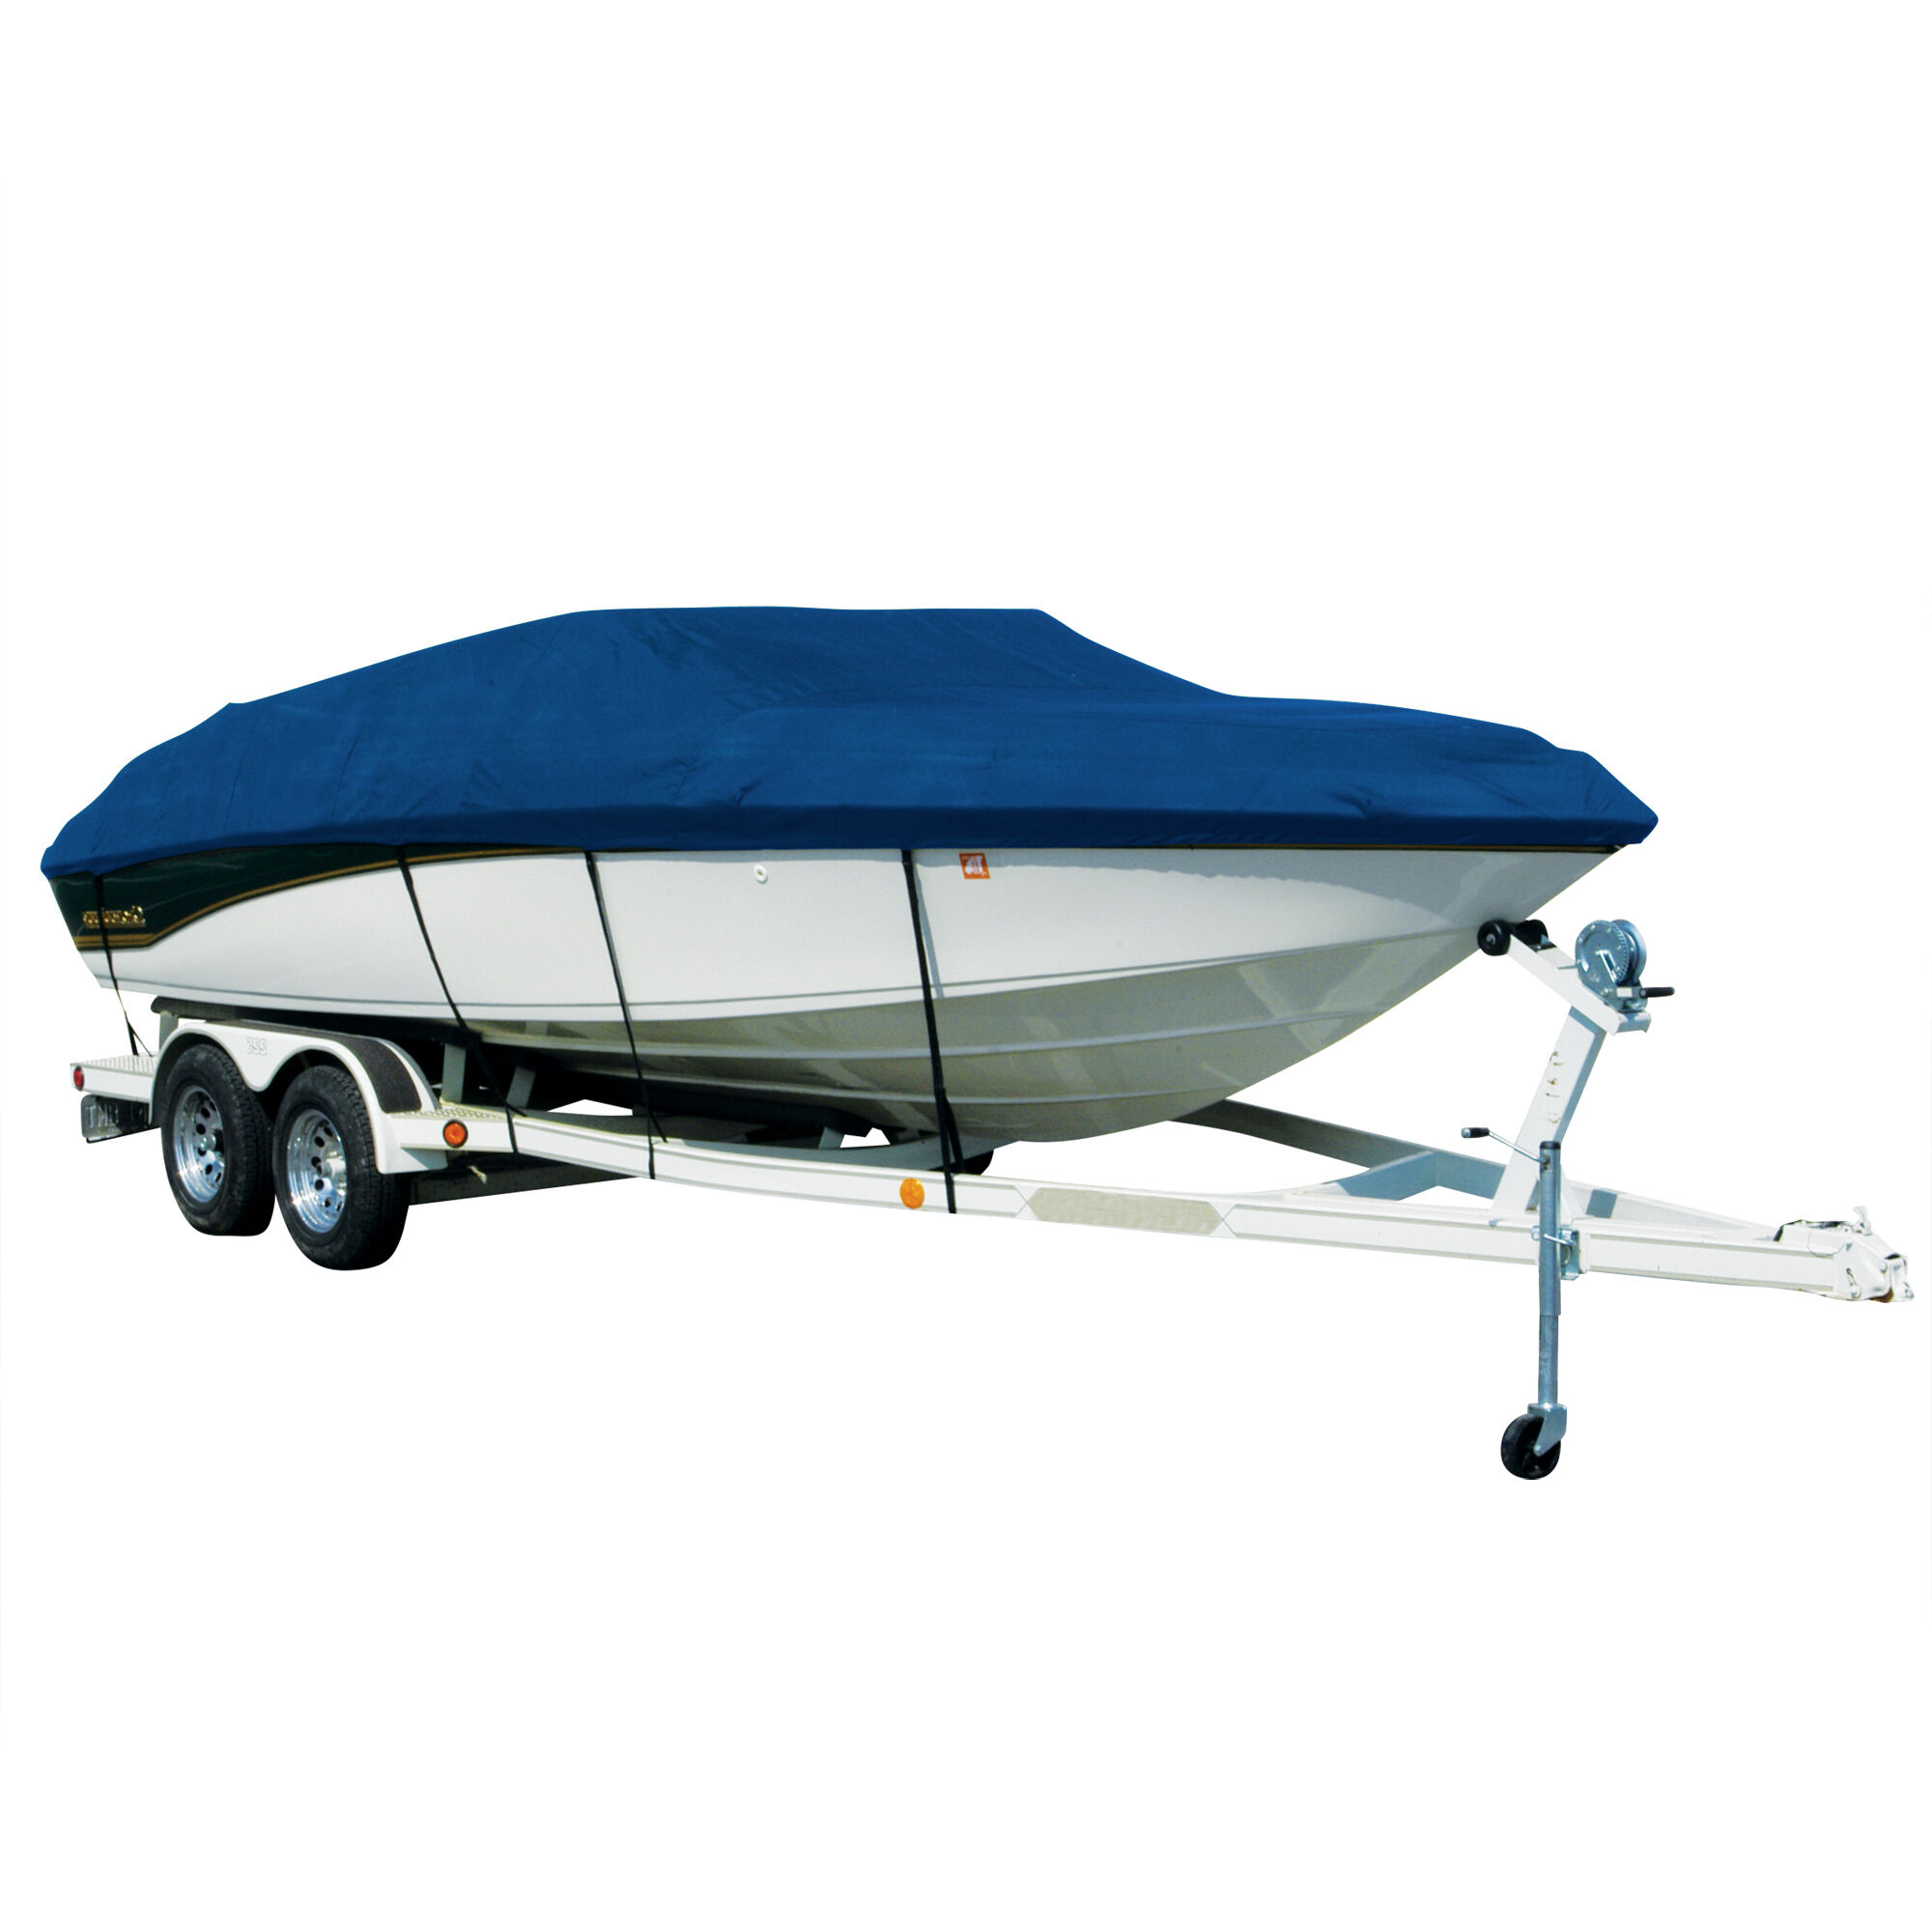 Covermate Exact Fit Sharkskin Boat Cover For Tige 2002 Fslm Does Not Cover Swim PLATFORMm in Royal Grey Heather